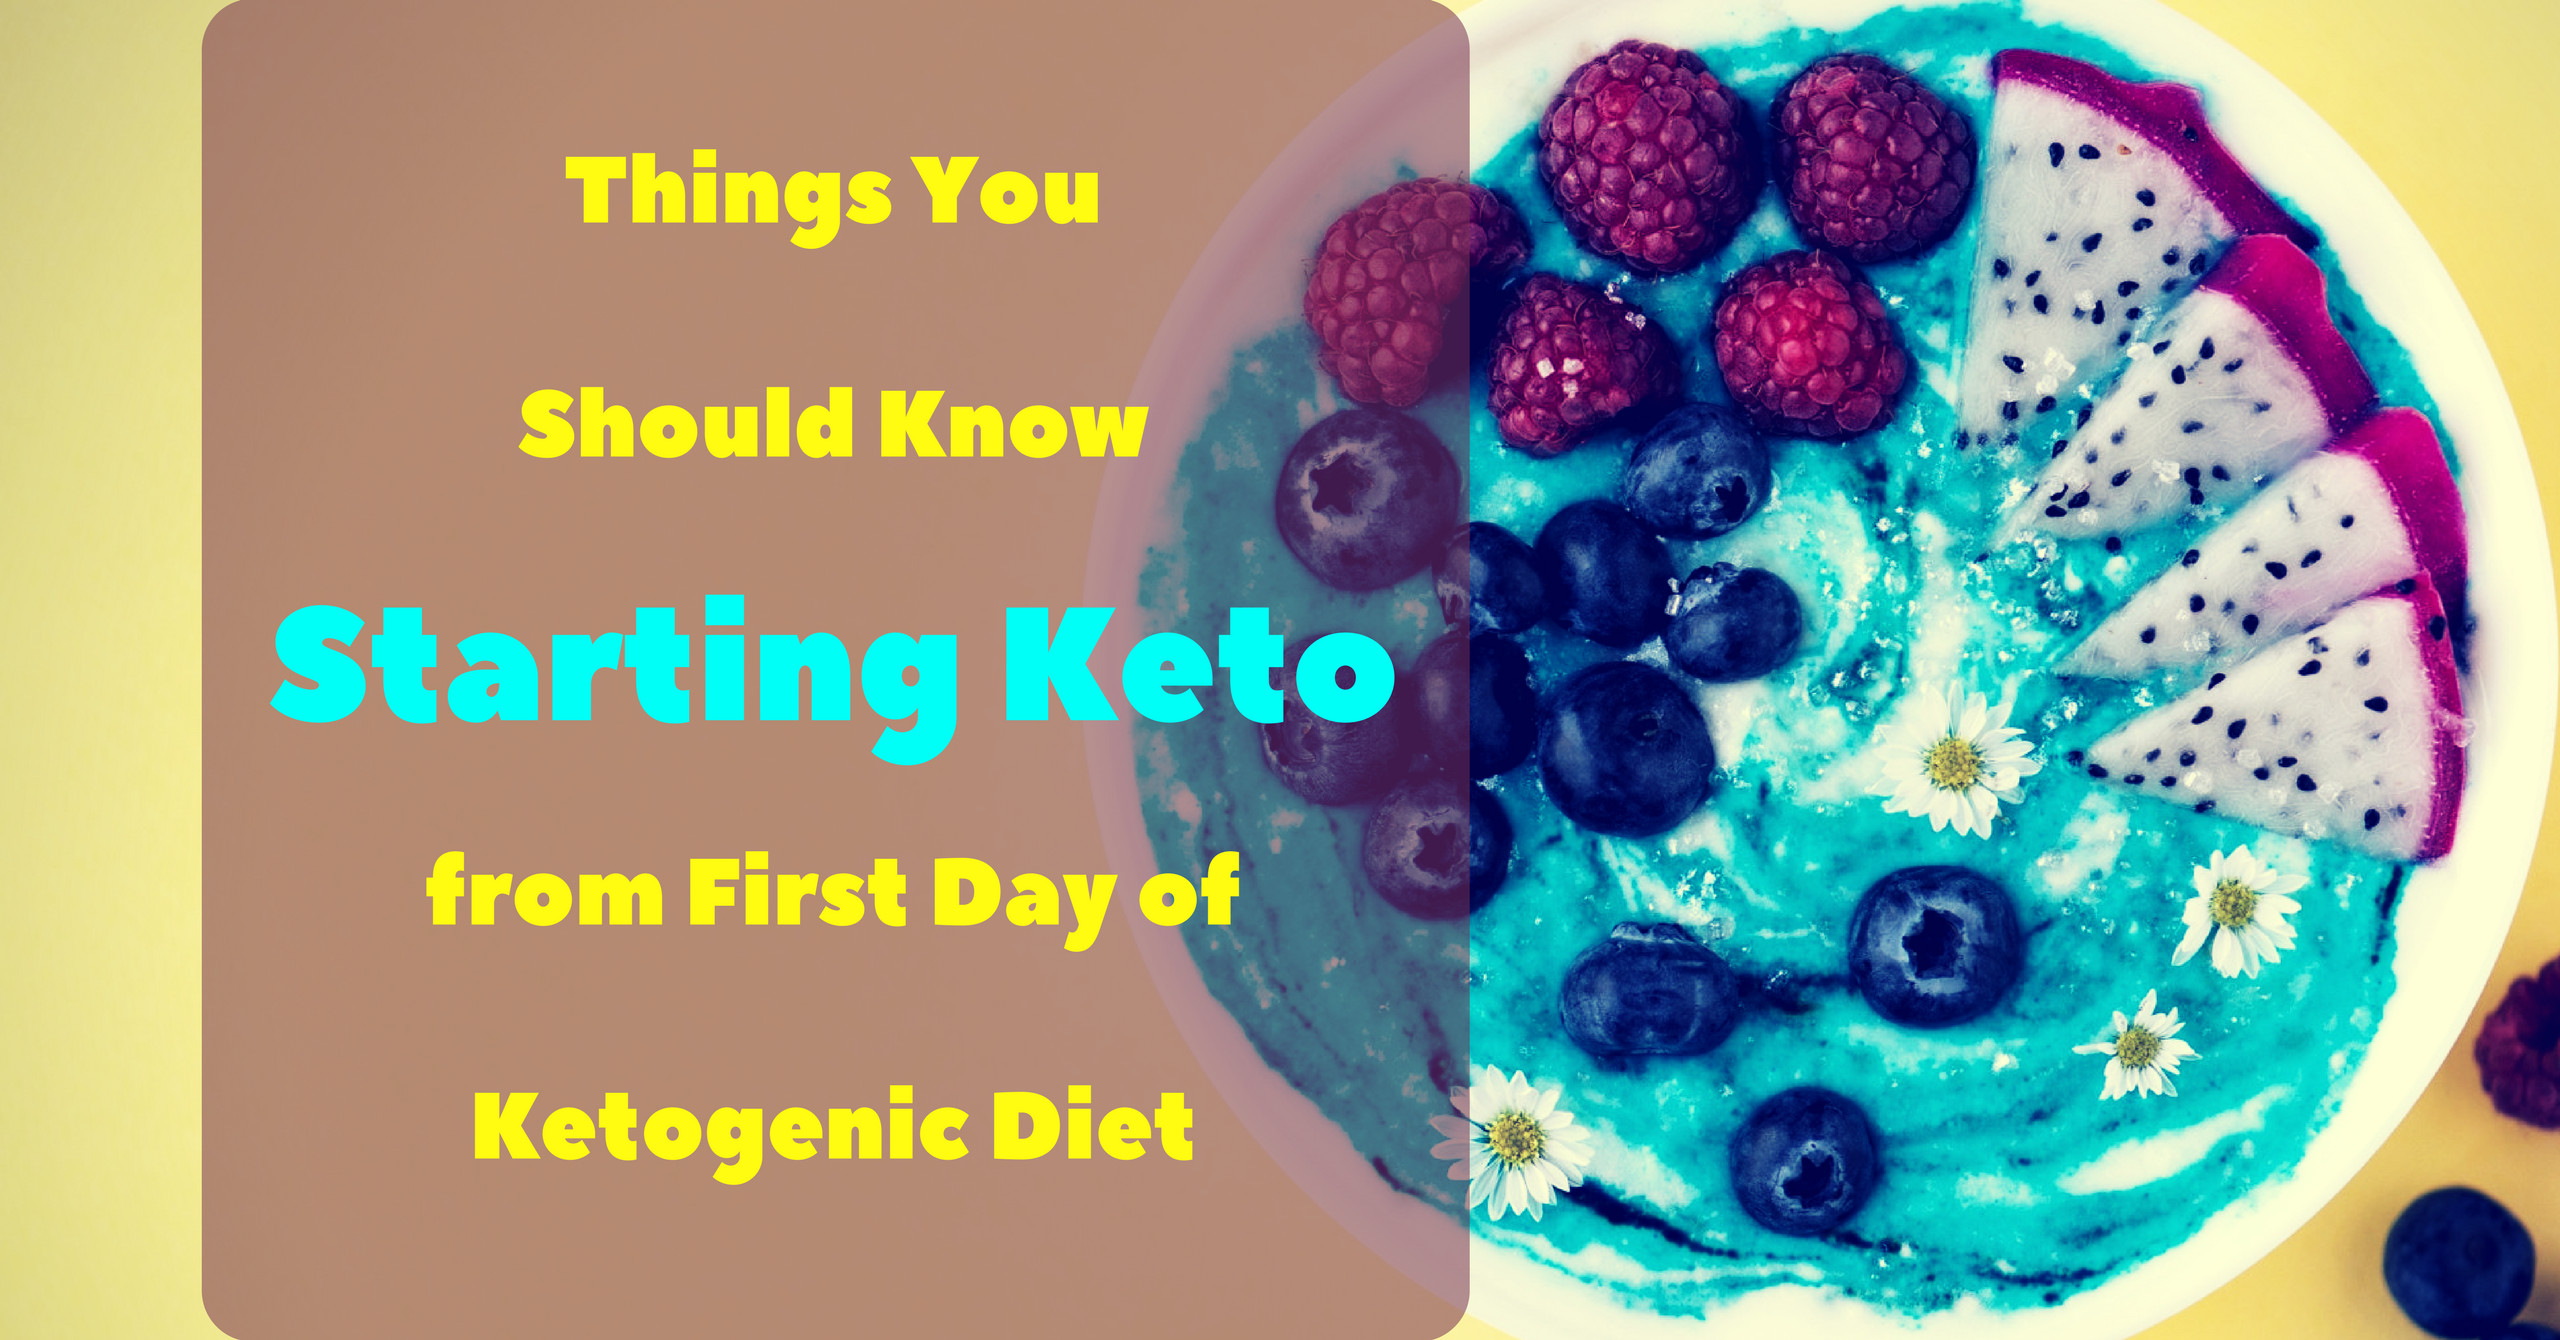 Are You Planning To Start Keto Diet? 16 Most Useful Tips Before You Get Started